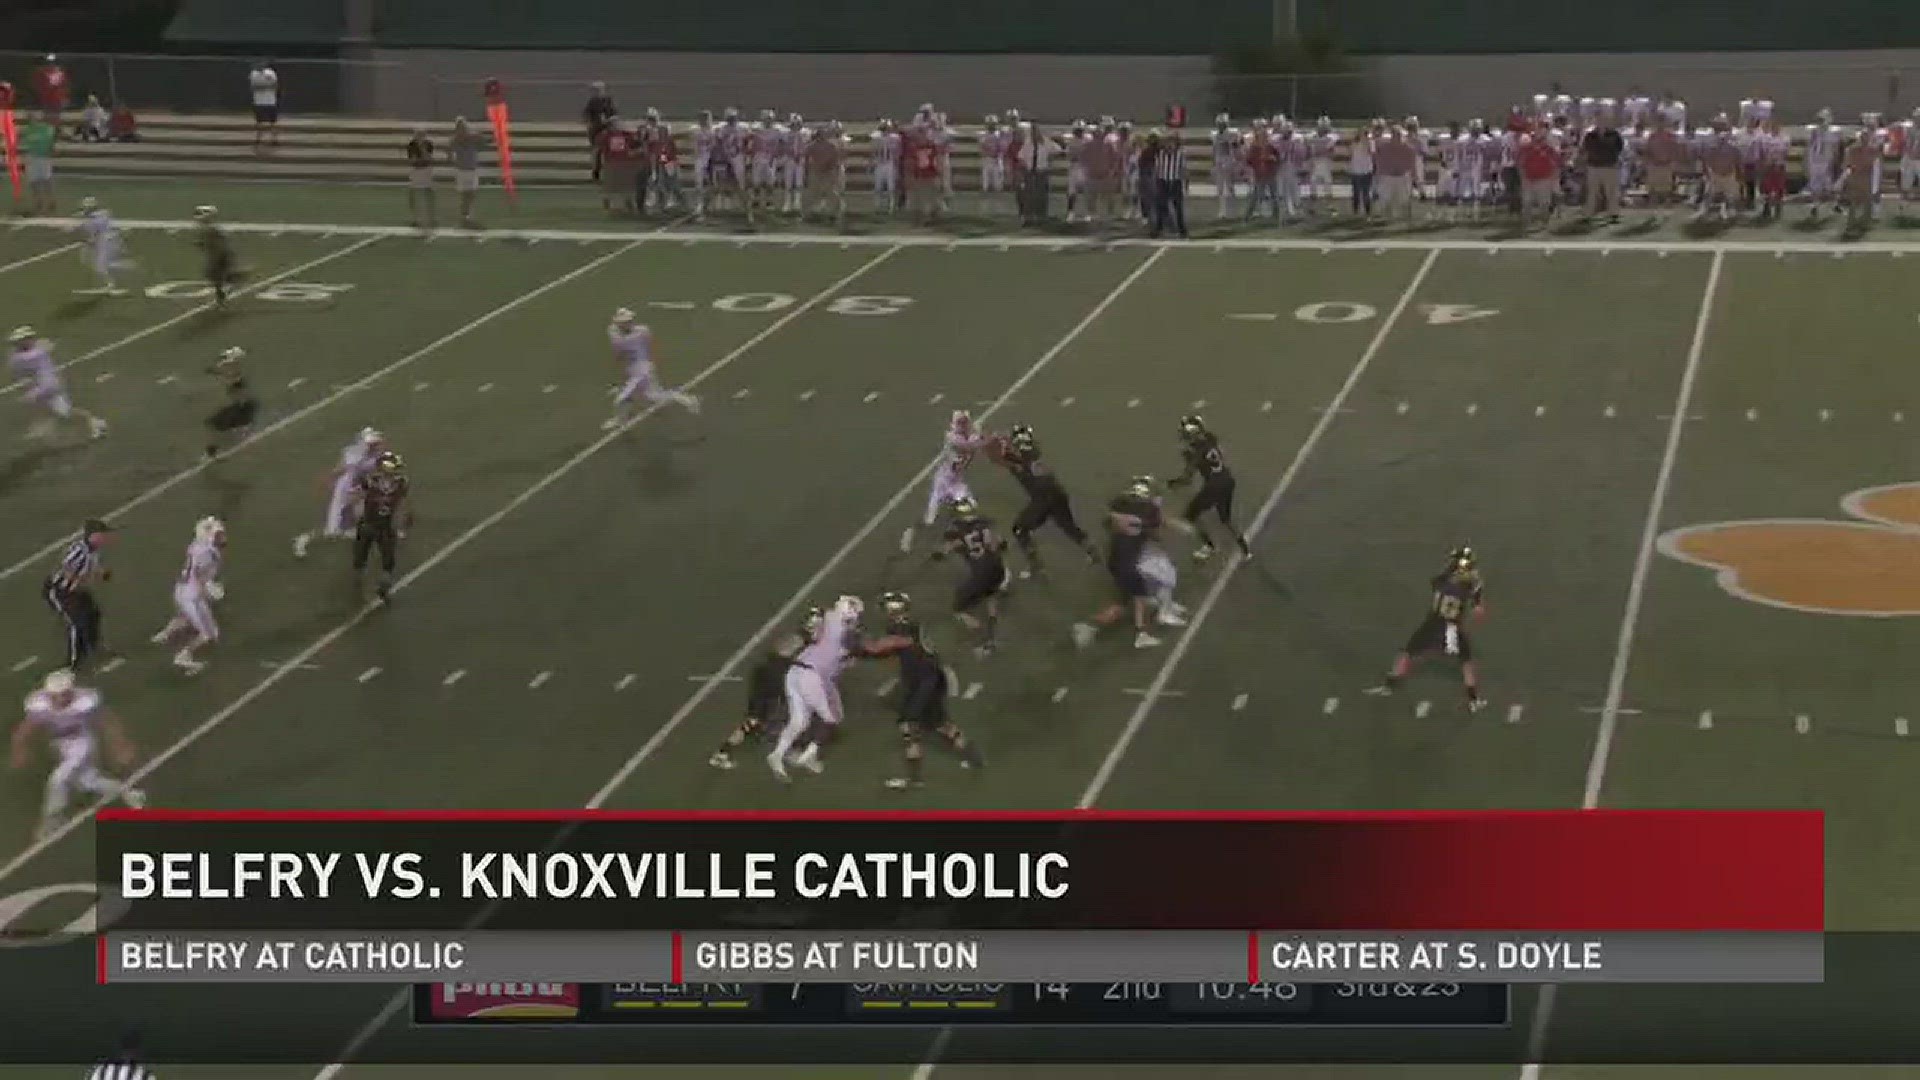 After losing to the Pirates in 2015, Catholic beat Belfry 45-20 on Friday.